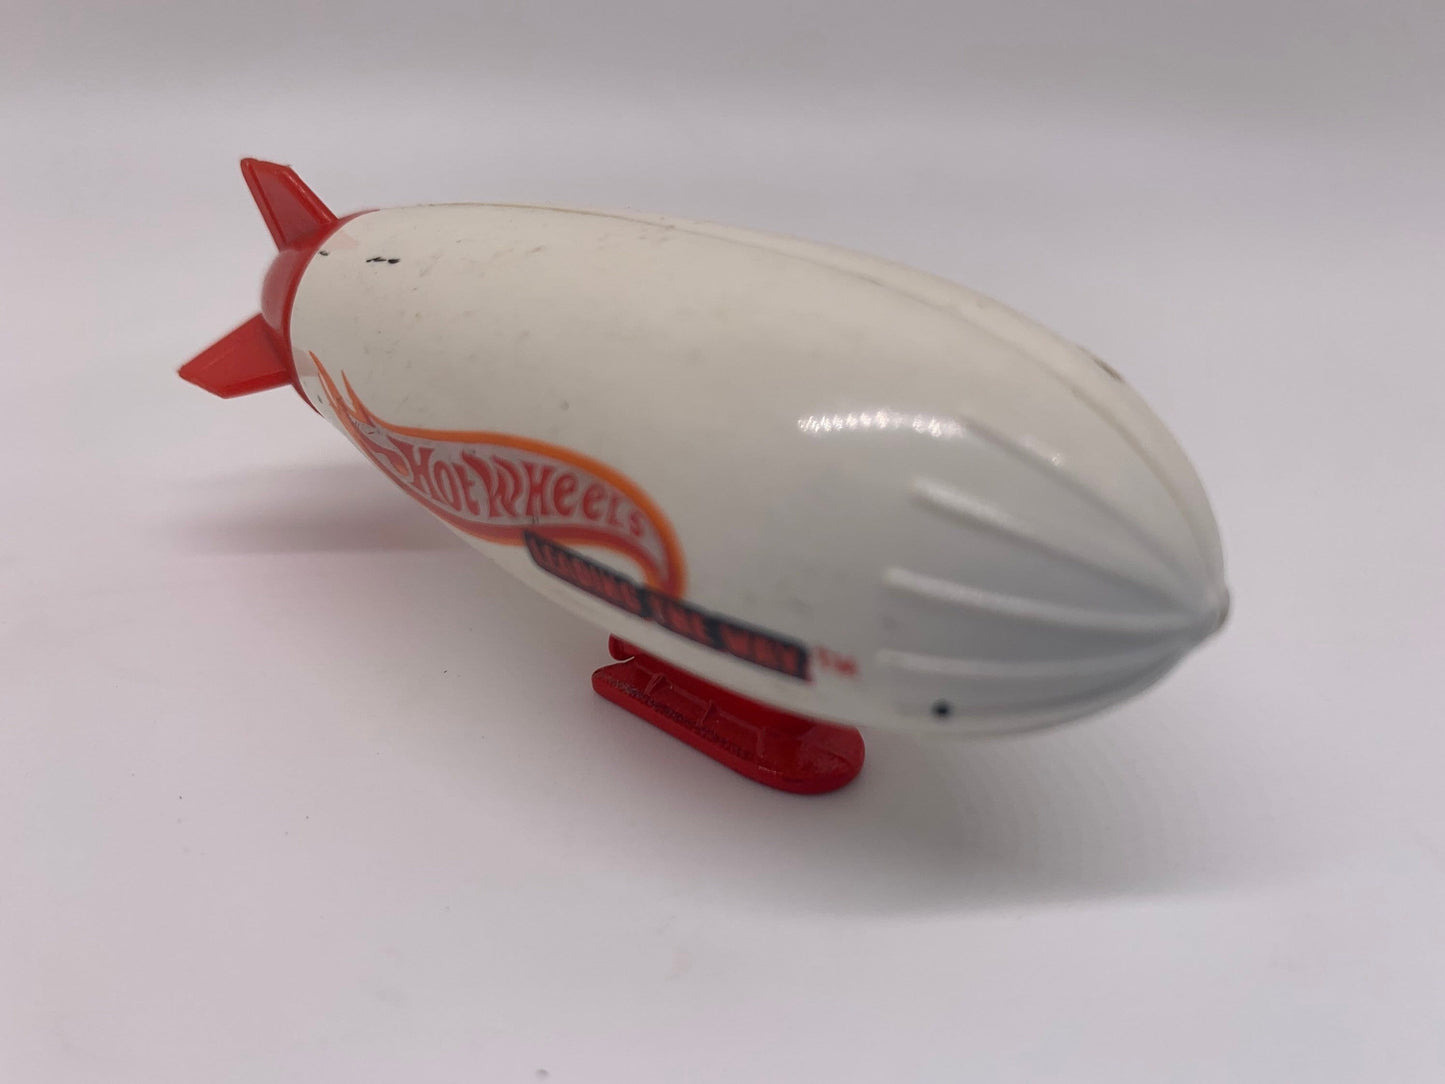 Hot Wheels Blimp White Virtual Collection Perfect Birthday Gift Miniature Collectible Scale Model Toy Car